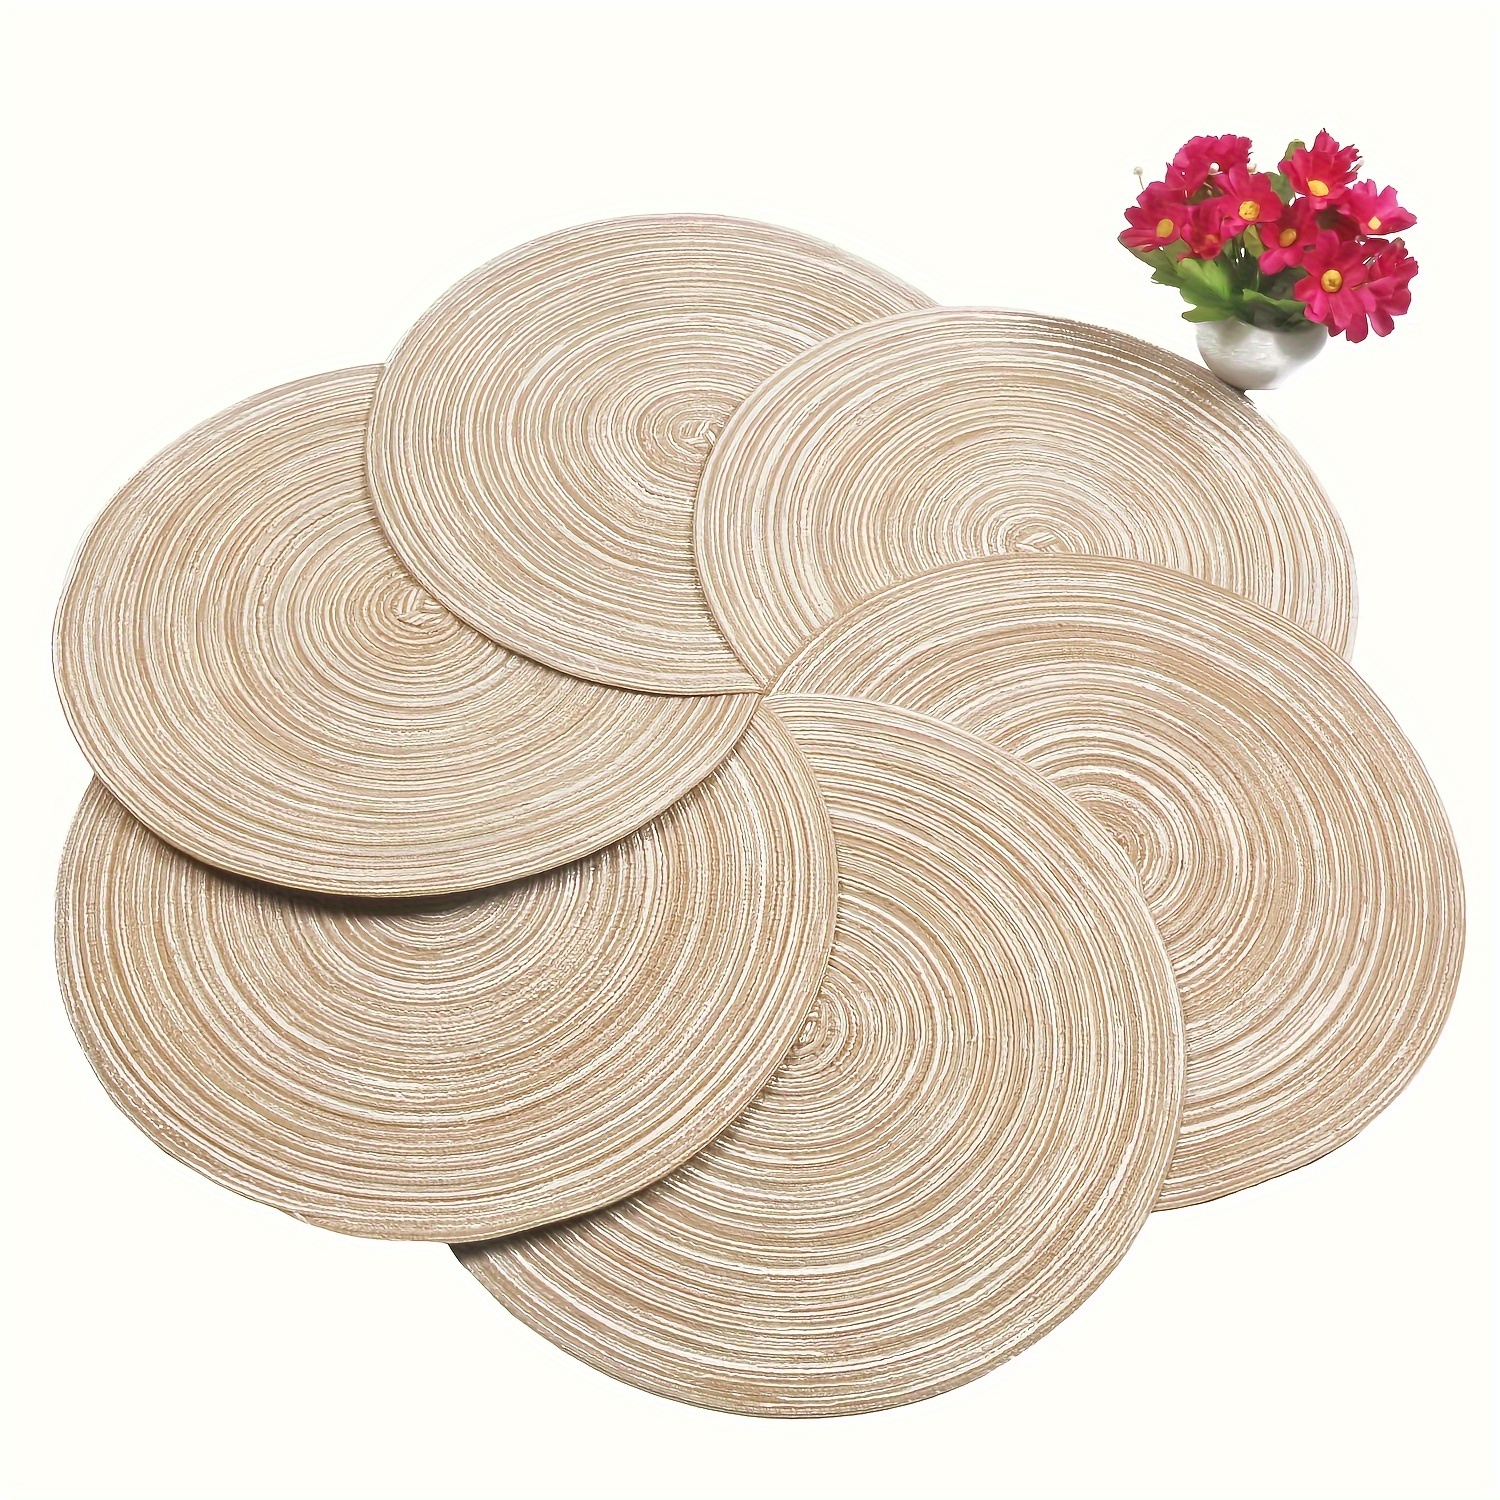 

Boho-chic Round Woven Placemat - Beige Cotton Table Mat For Dining, Kitchen, Restaurant & Coffee Shop Decor | Hand Wash Only